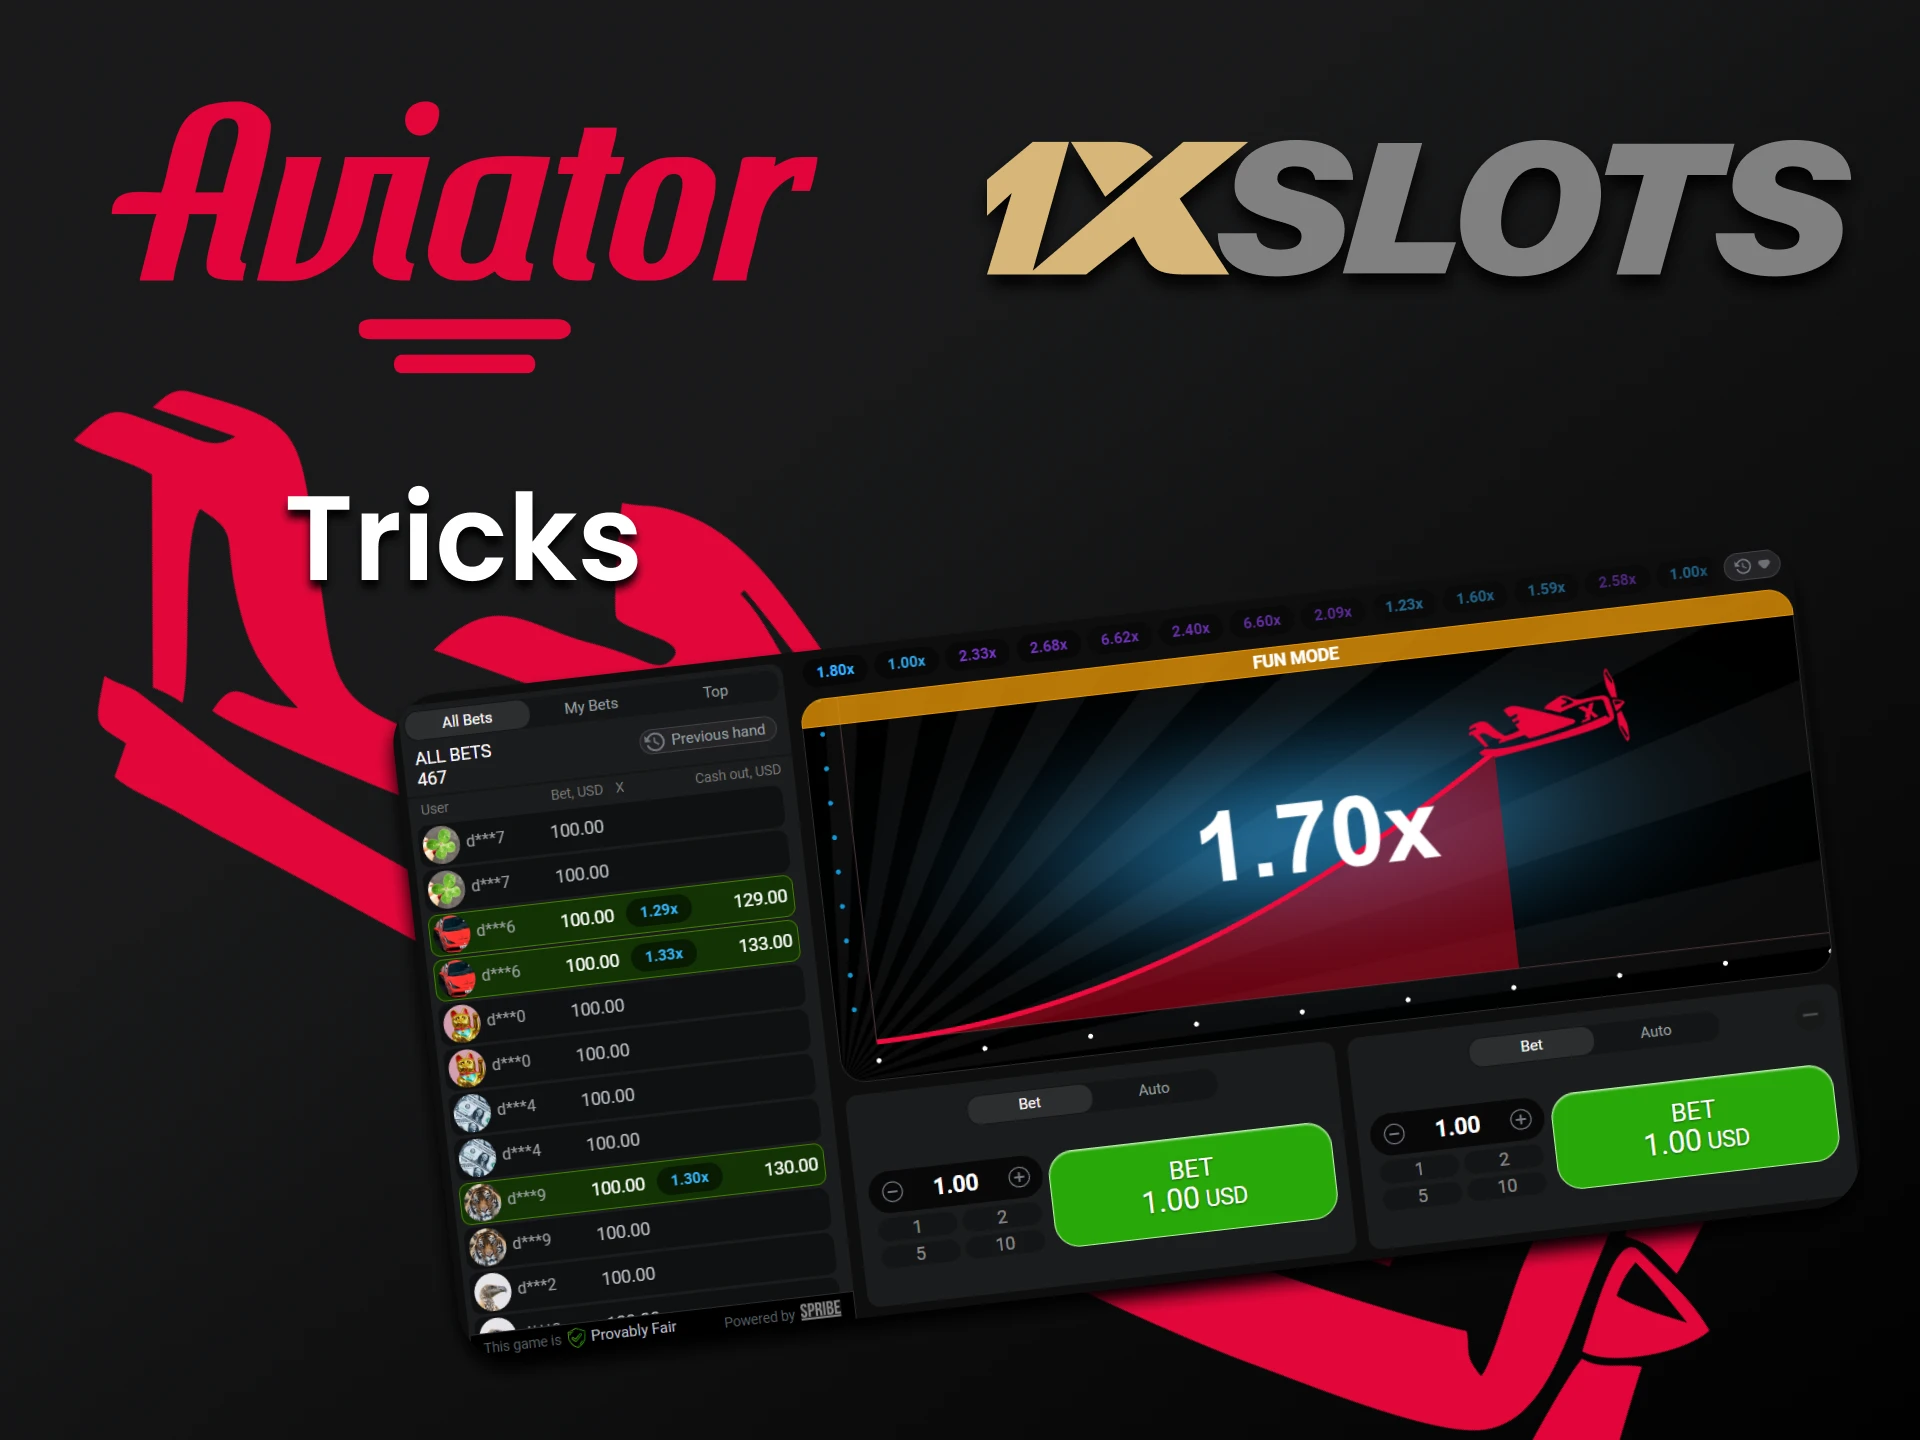 We will tell you about tricks for Aviator at 1xslots.